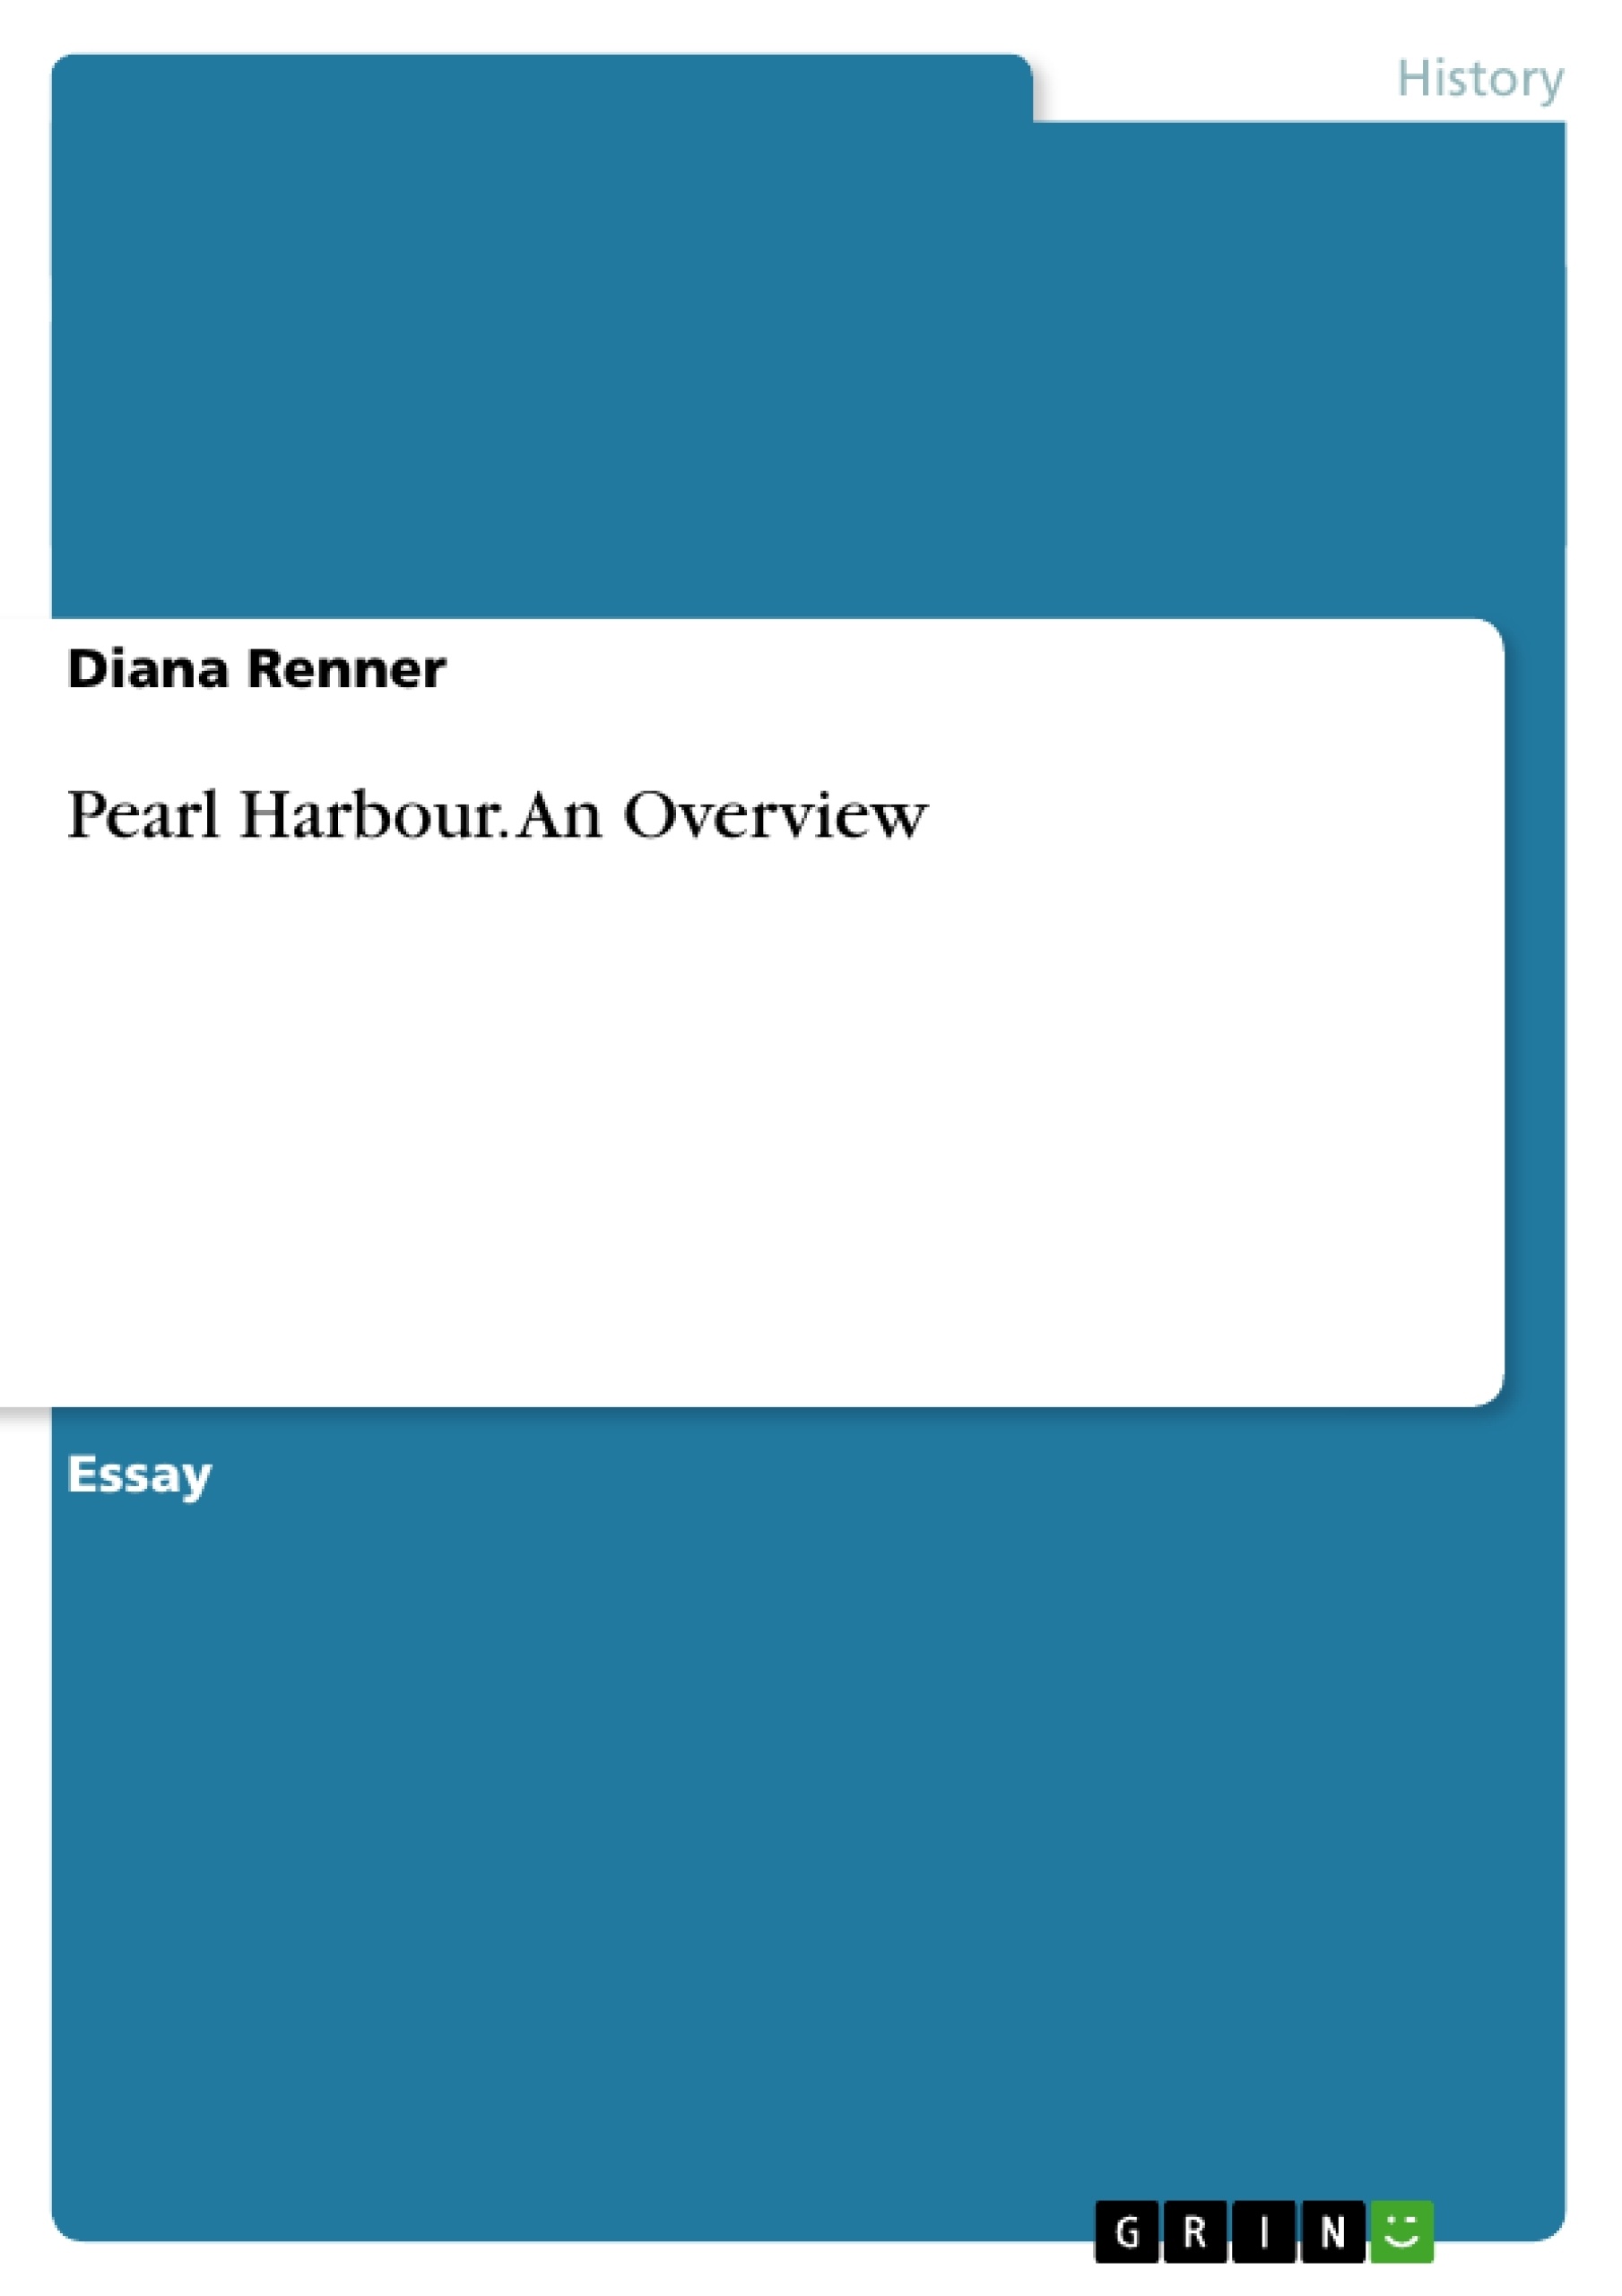 Title: Pearl Harbour. An Overview